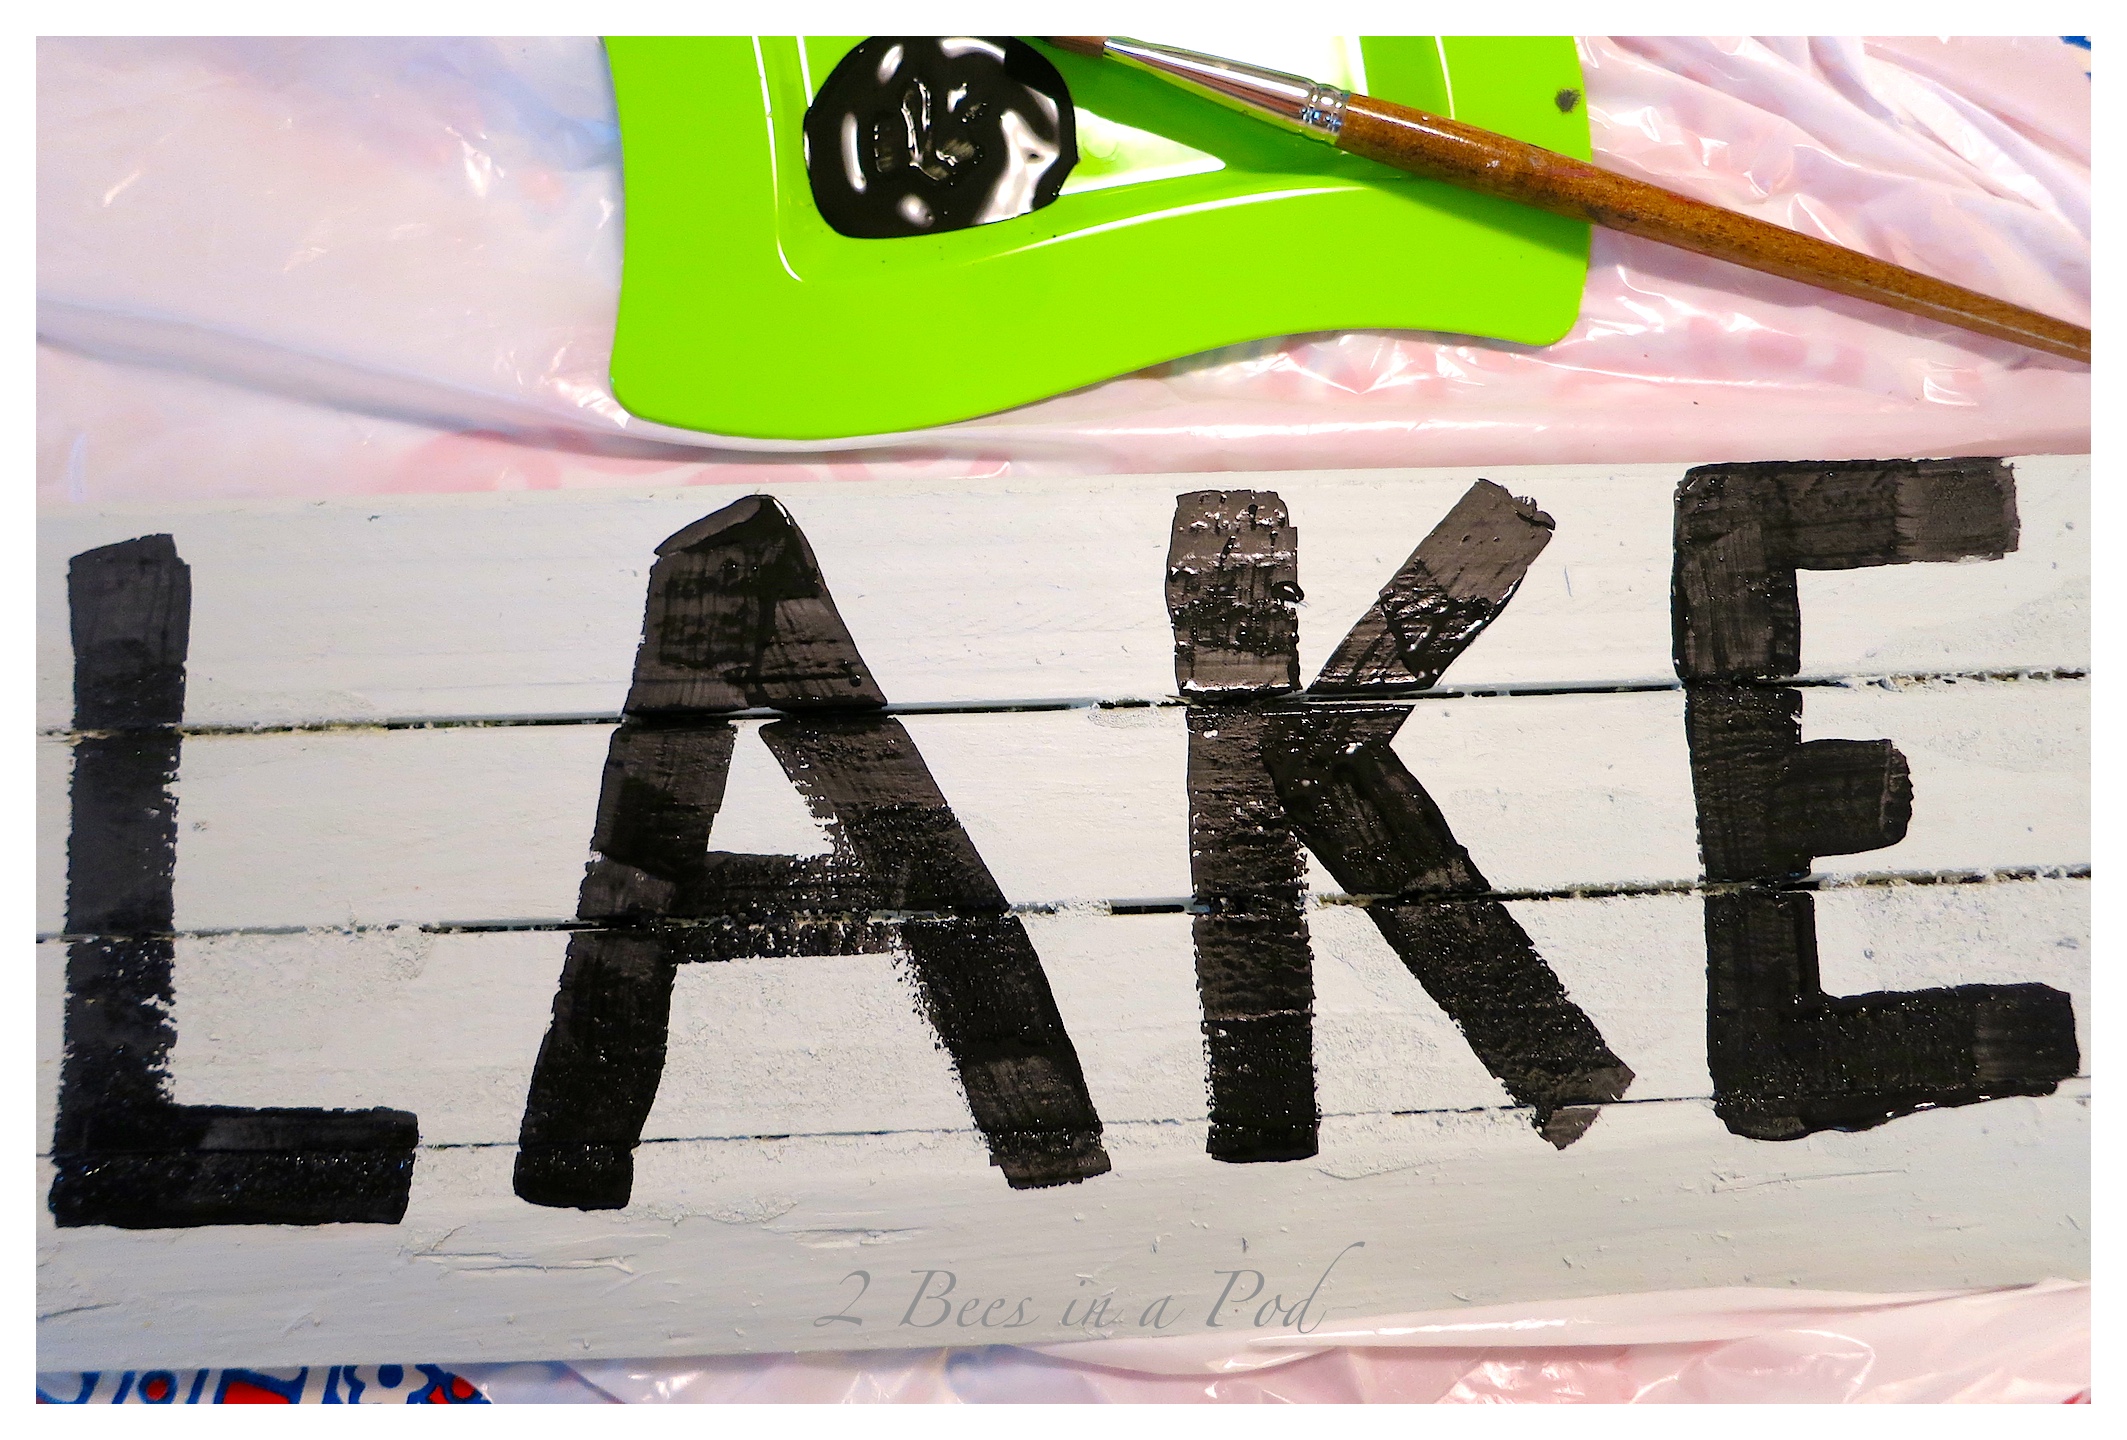 DIY Rustic Vintage "Lake" Sign - so easy to make using grade stake pickets from the hardware store. Paint and wax for an antiqued finished look.